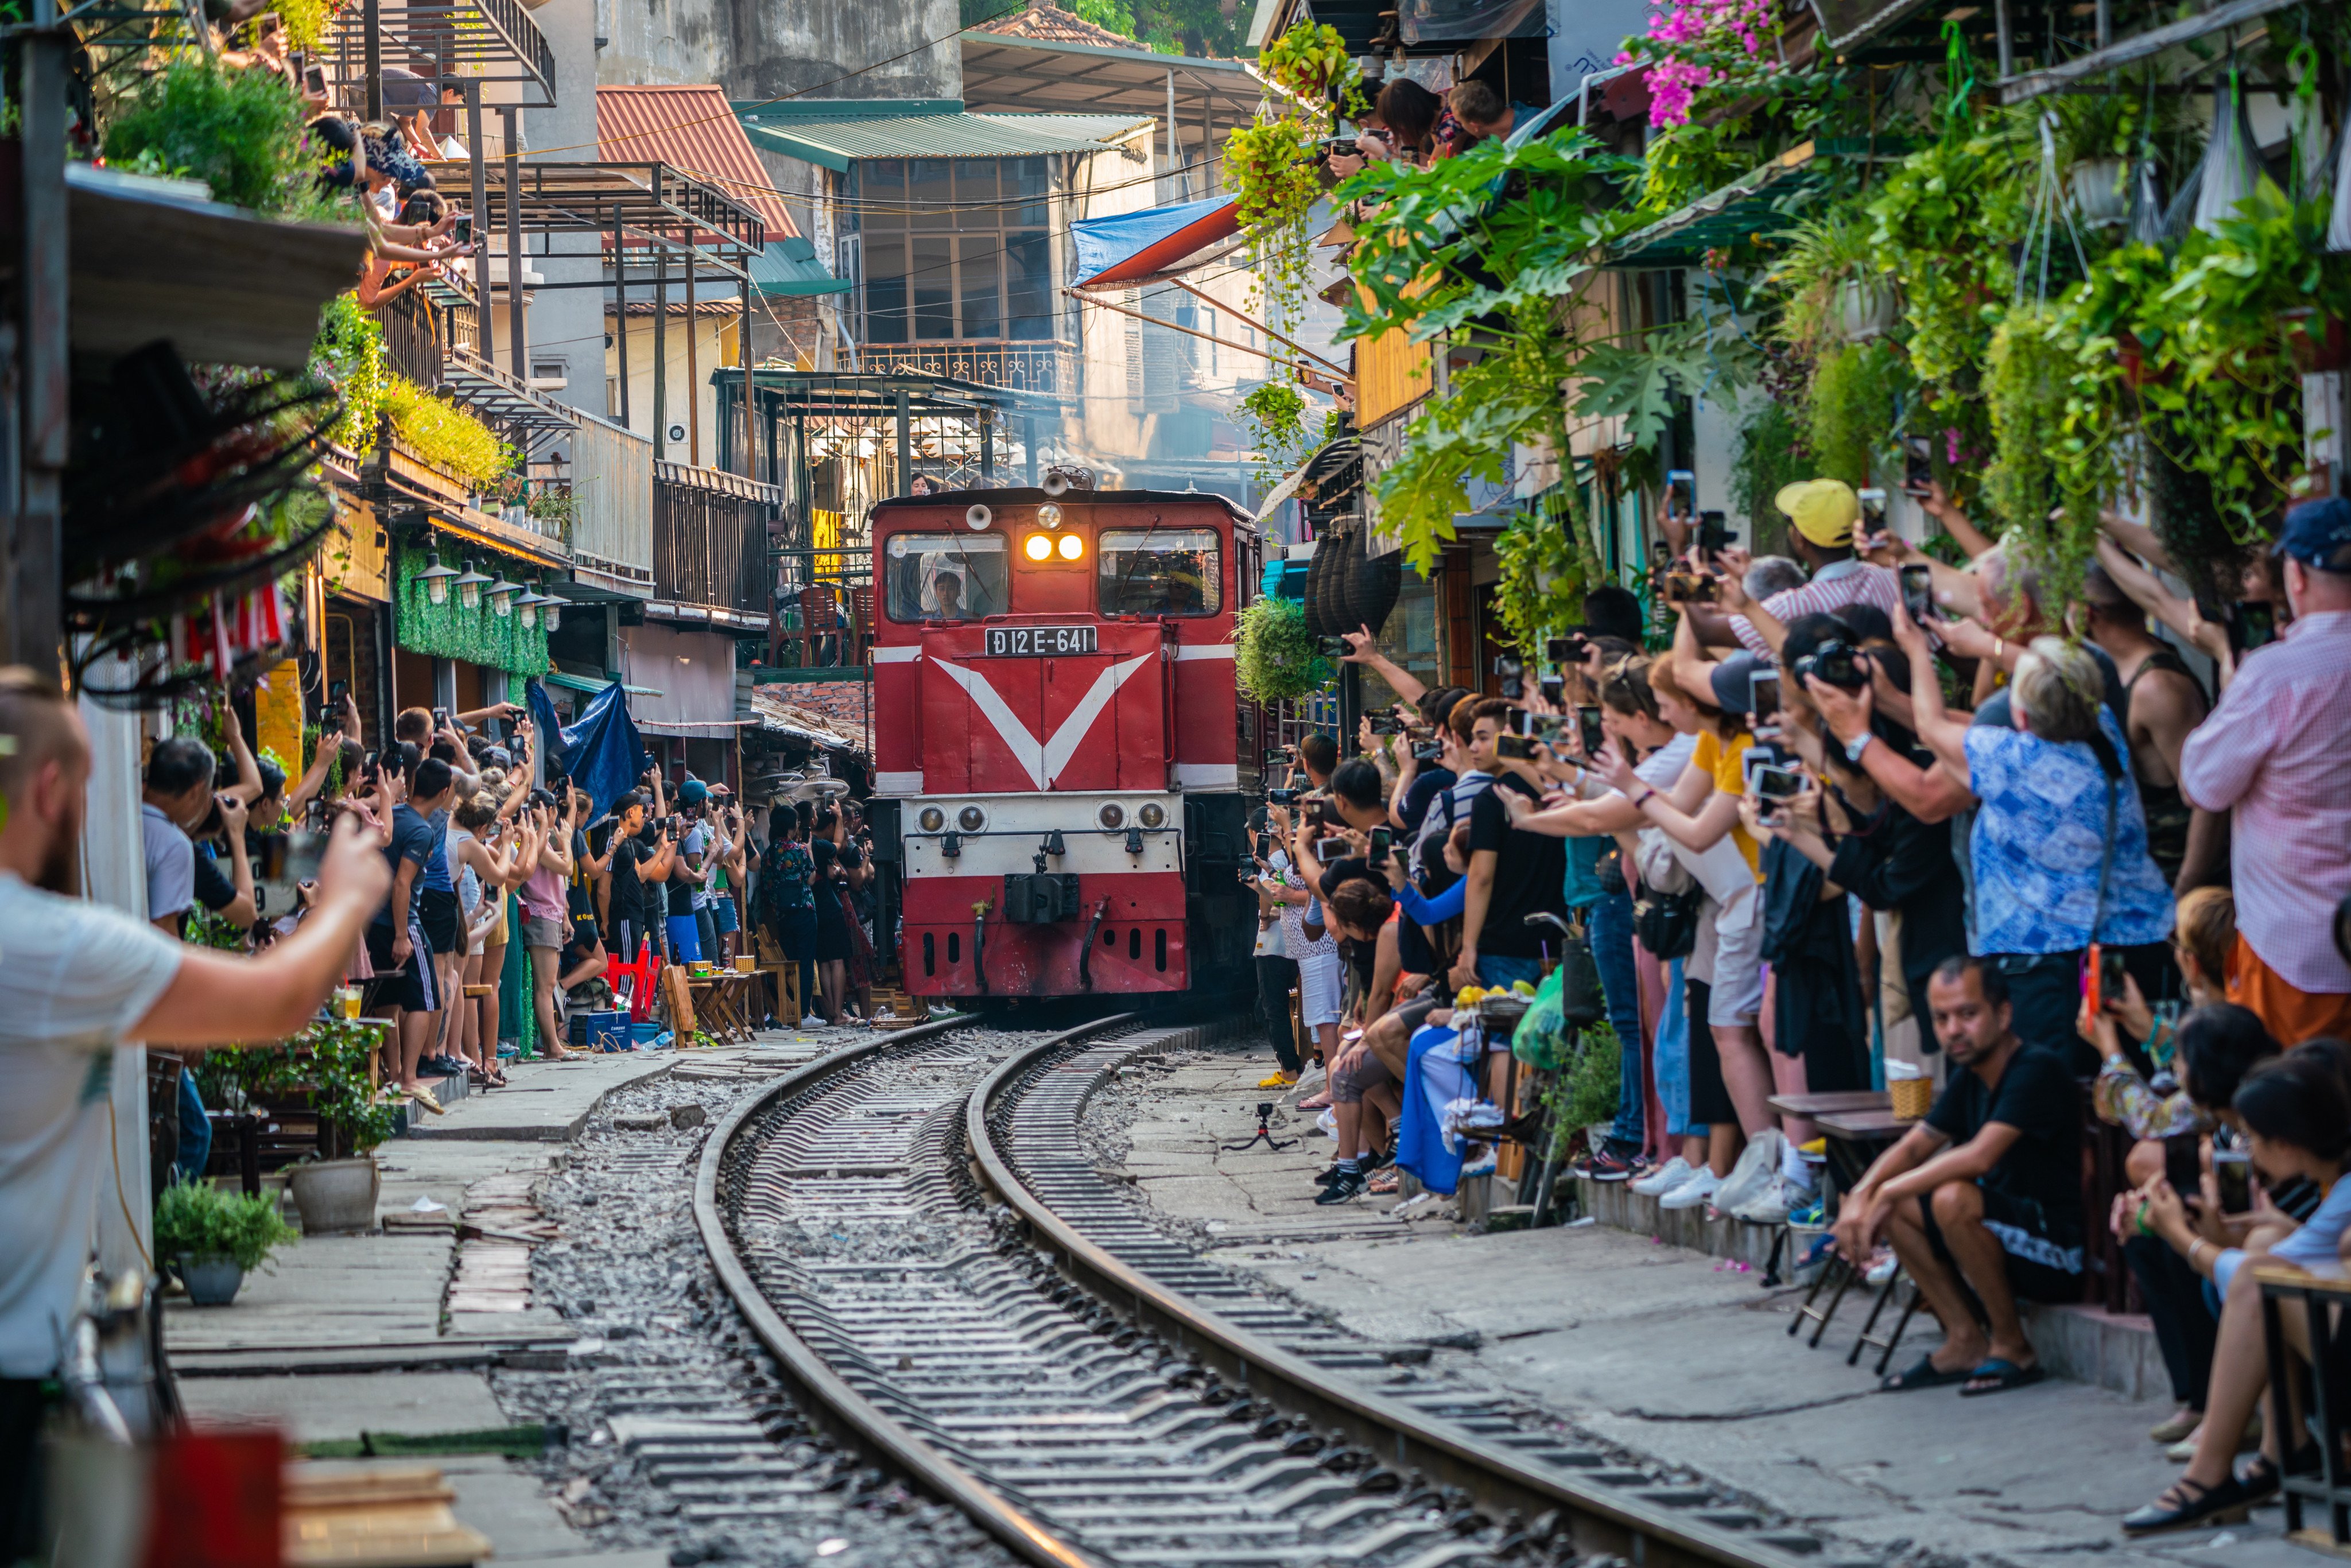 A railway line in Hanoi’s Old Quarter is a notoriously dangerous place for tourists, which is why authorities are taking measures to restrict their access. Elsewhere, cities and countries tax tourists or charge entry fees to manage visitor flows and encourage more environment-friendly travel. Photo: Shutterstock